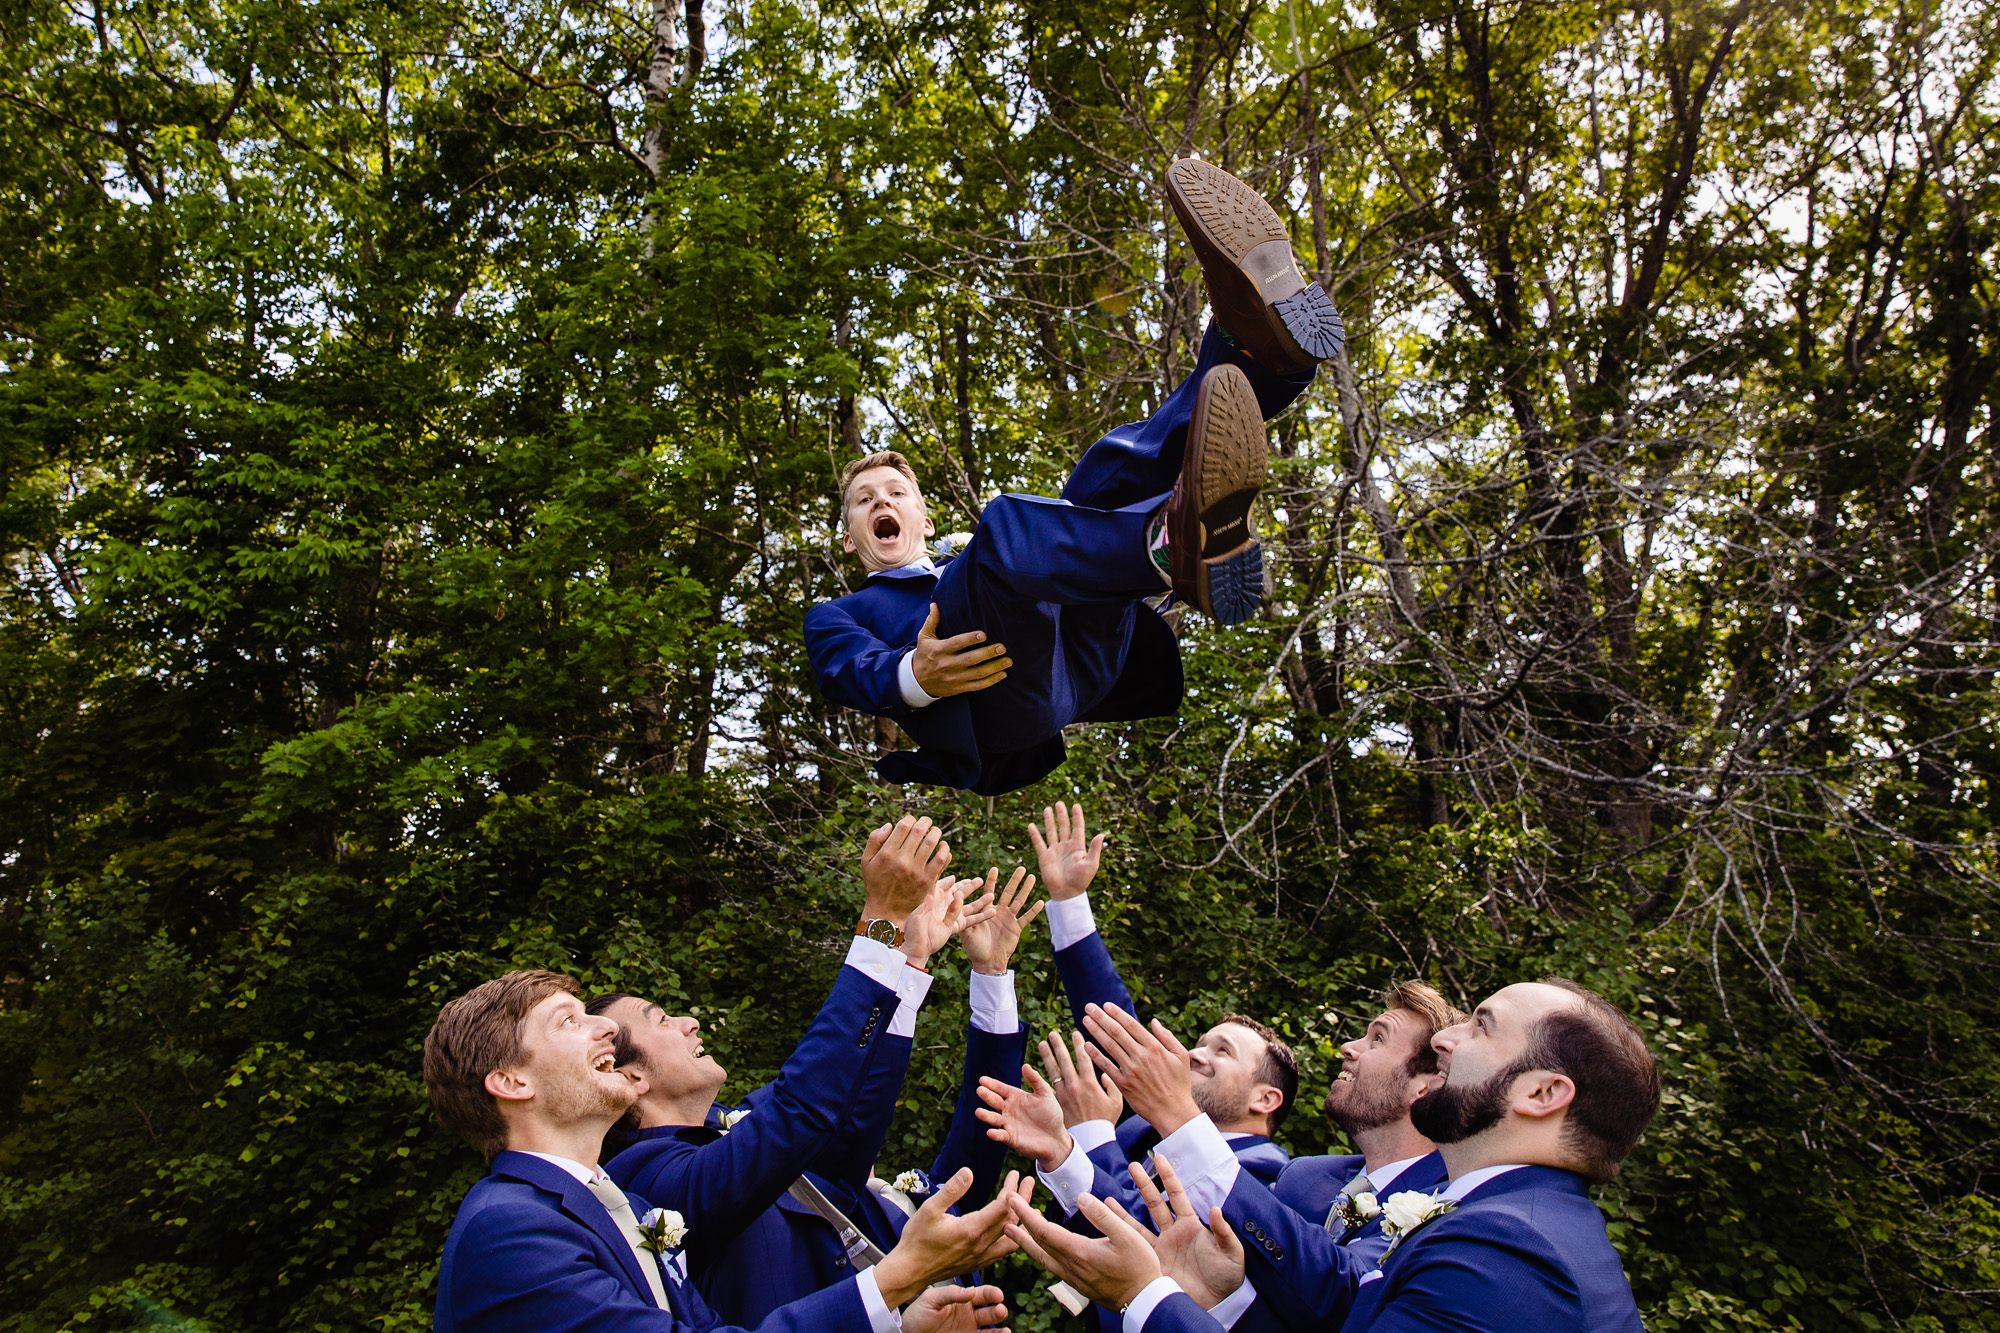 Groomsmen throw the groom into the air at his wedding at Marianmade Farm in Wiscasset Maine